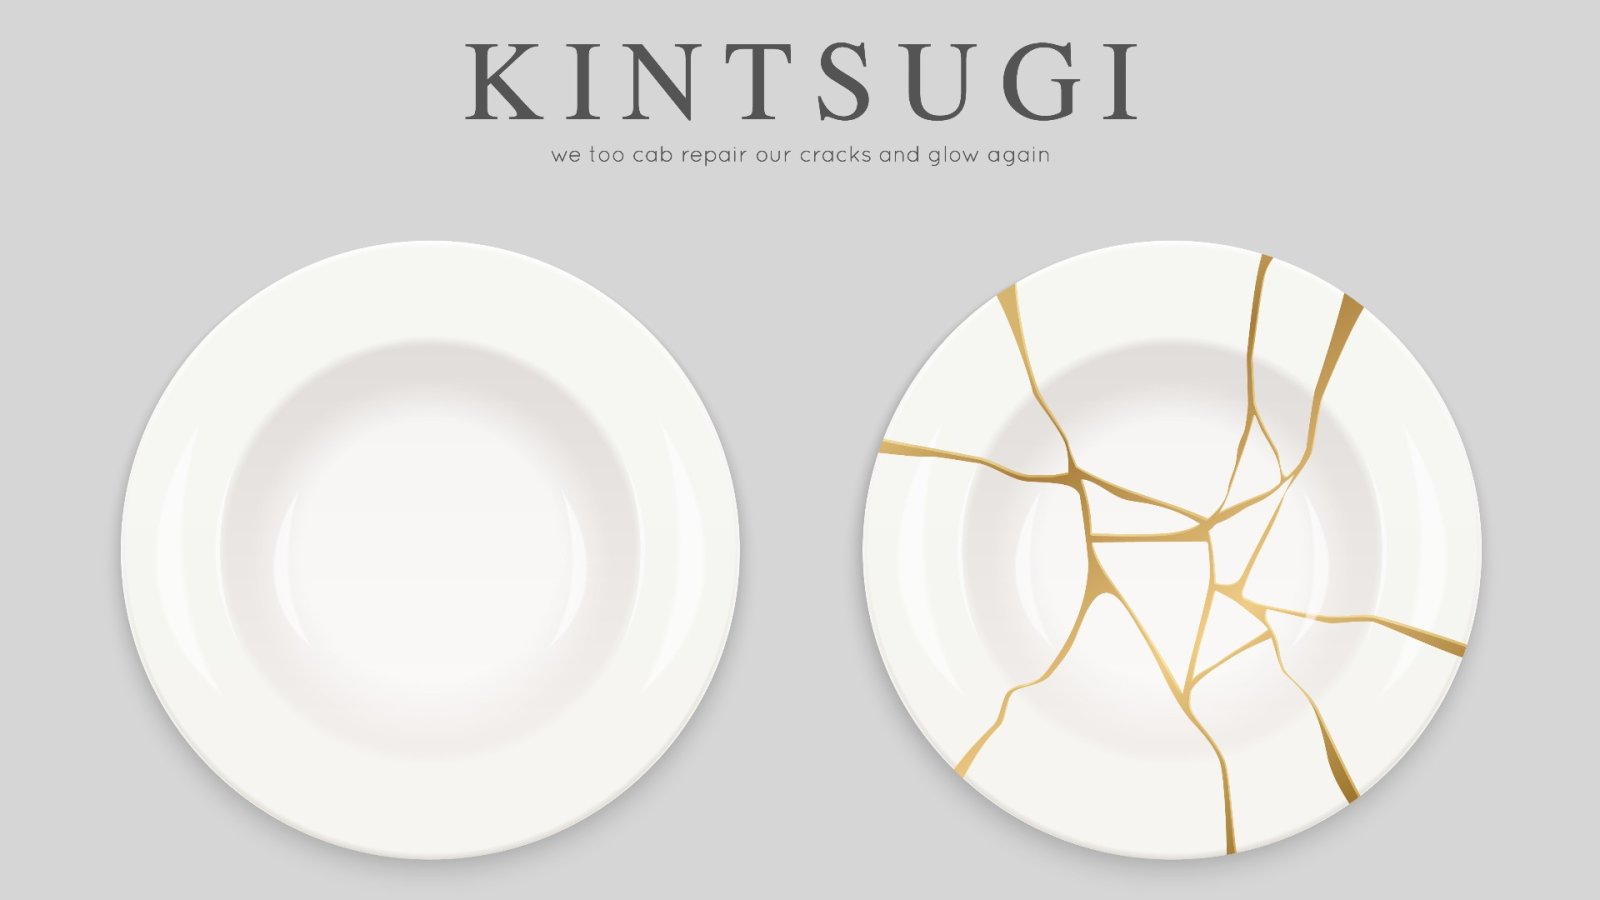 The healing power of a Japanese craft that everybody loves: kintsugi